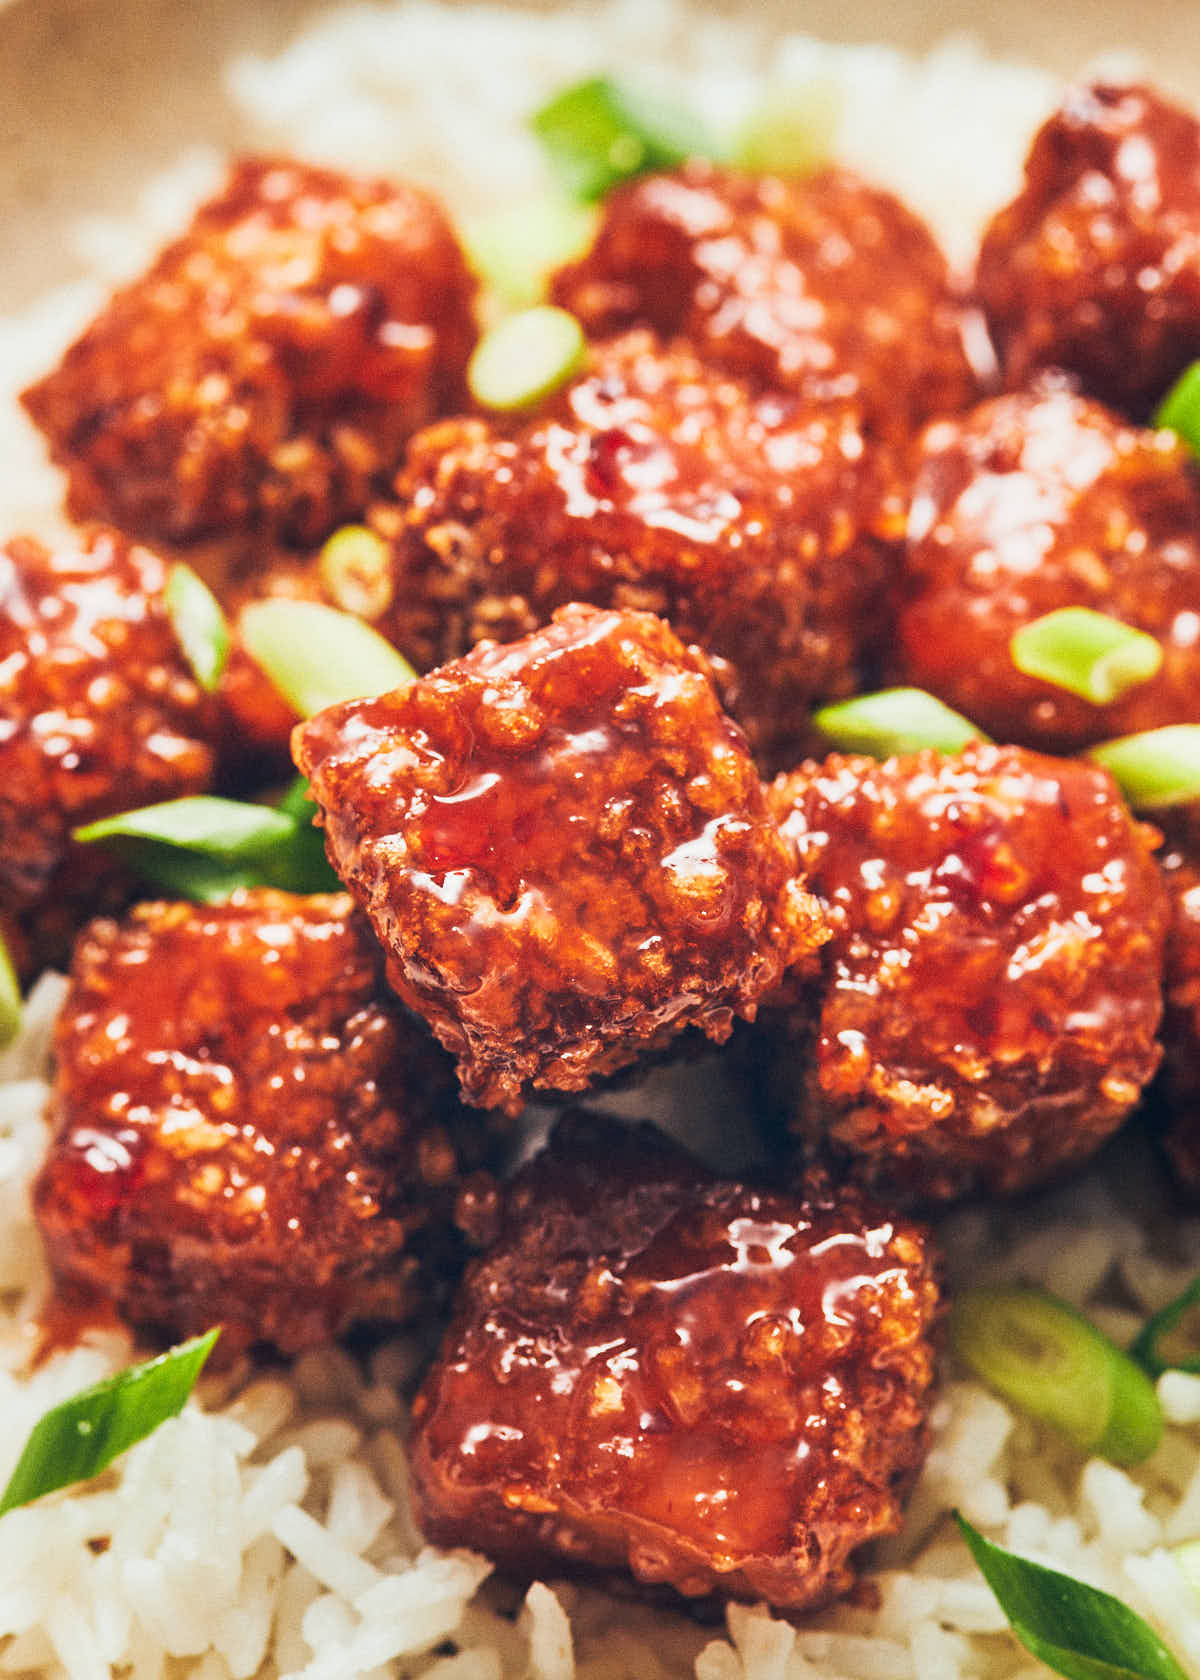 Crispy cubes of air fryer tofu coated in sweet chili sauce, with white rice and scallions